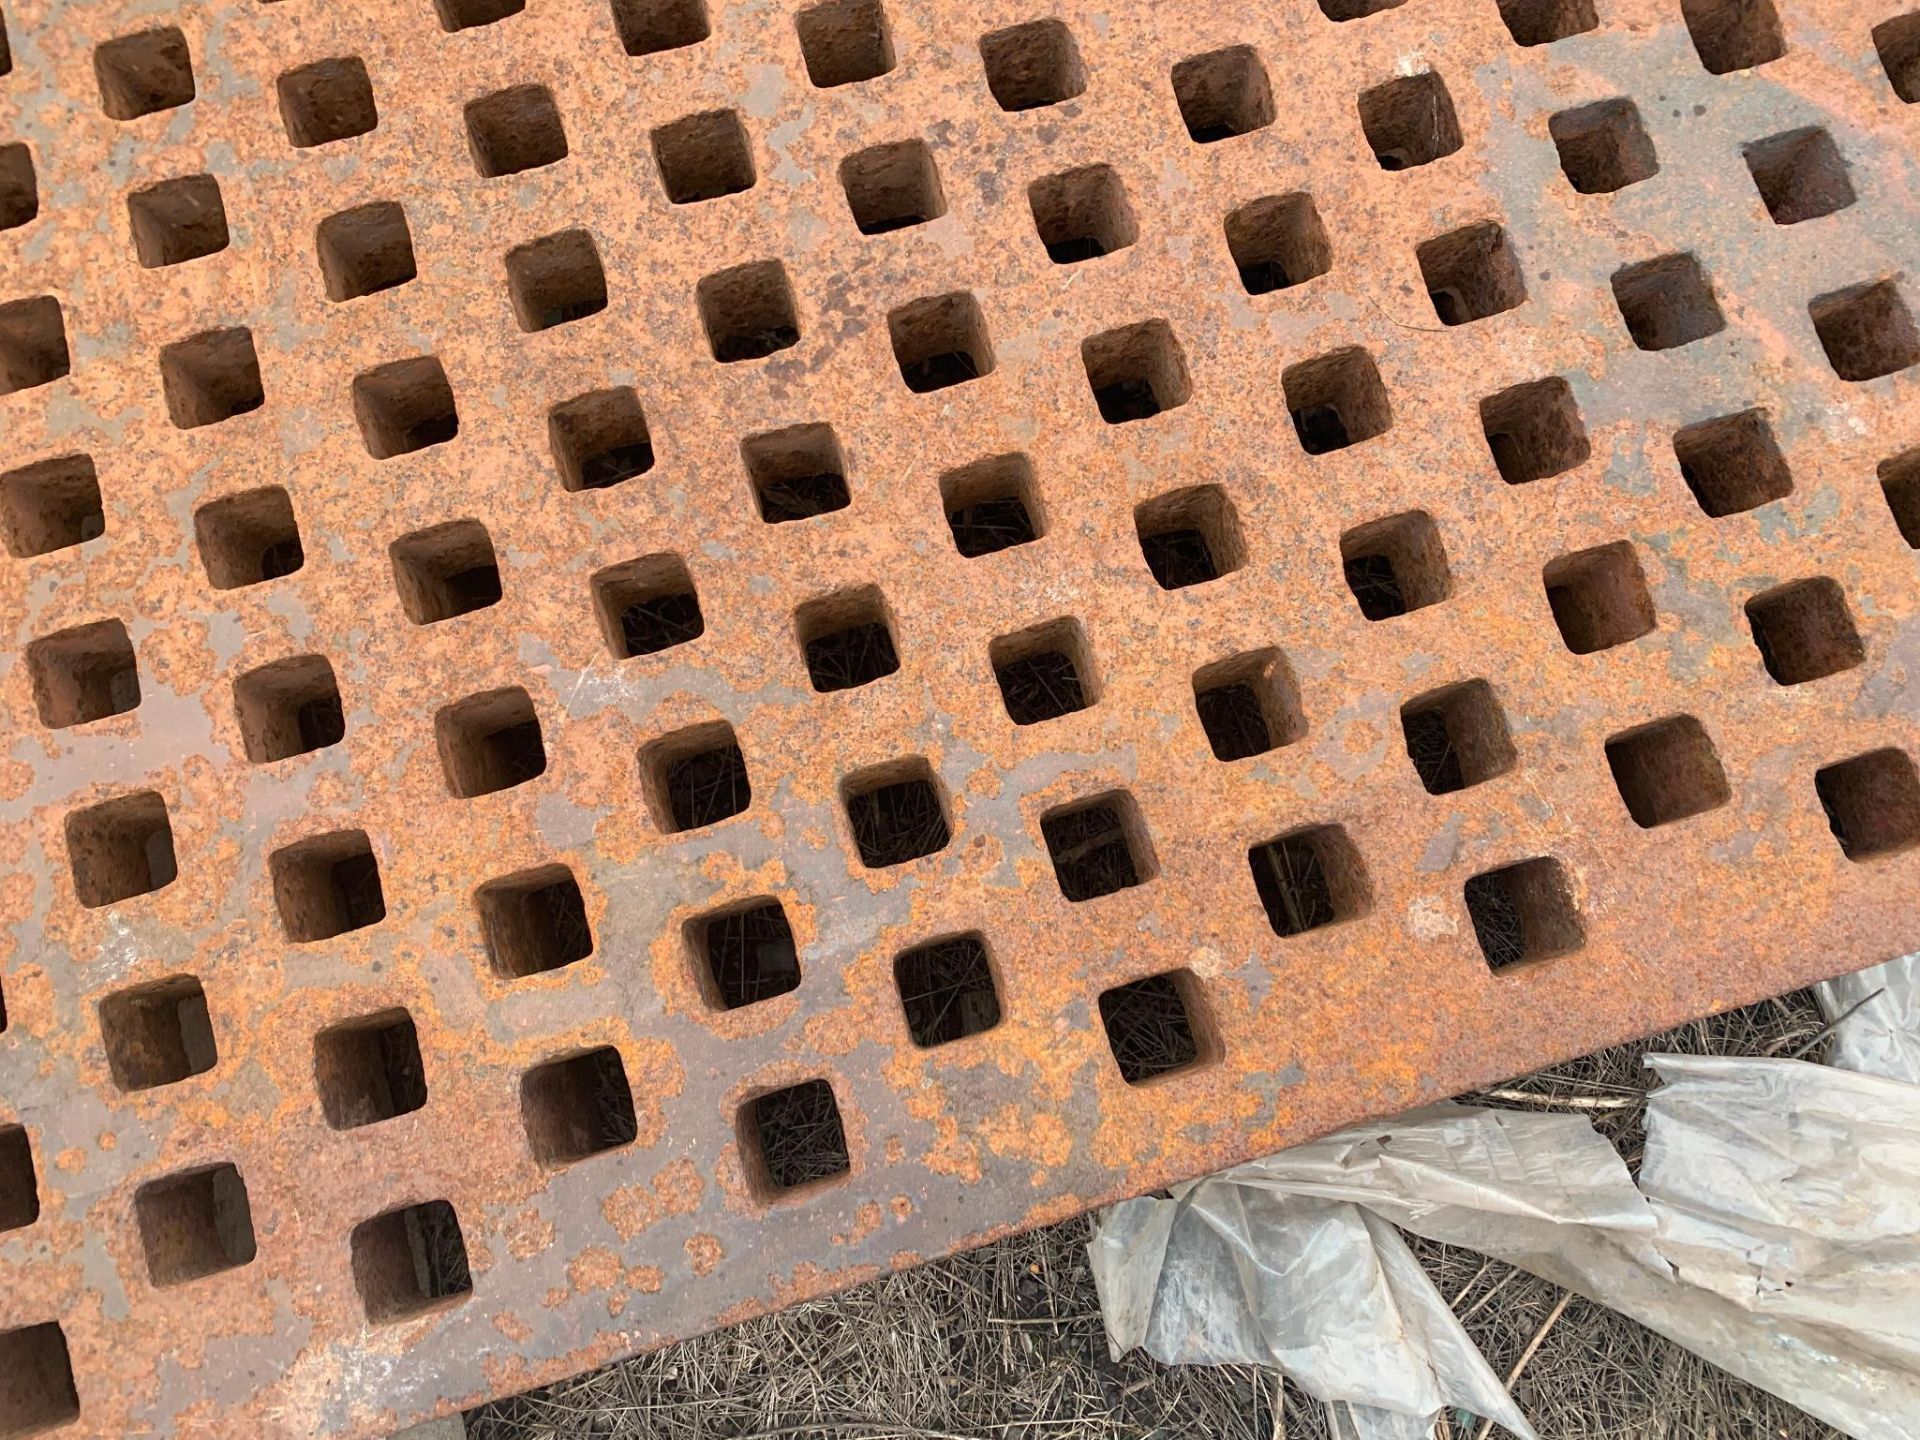 Acorn Style Welding Platen. Approx 61.5" x 61.5" x 5.25" deep with 2" square holes. Note: Small crac - Image 18 of 33